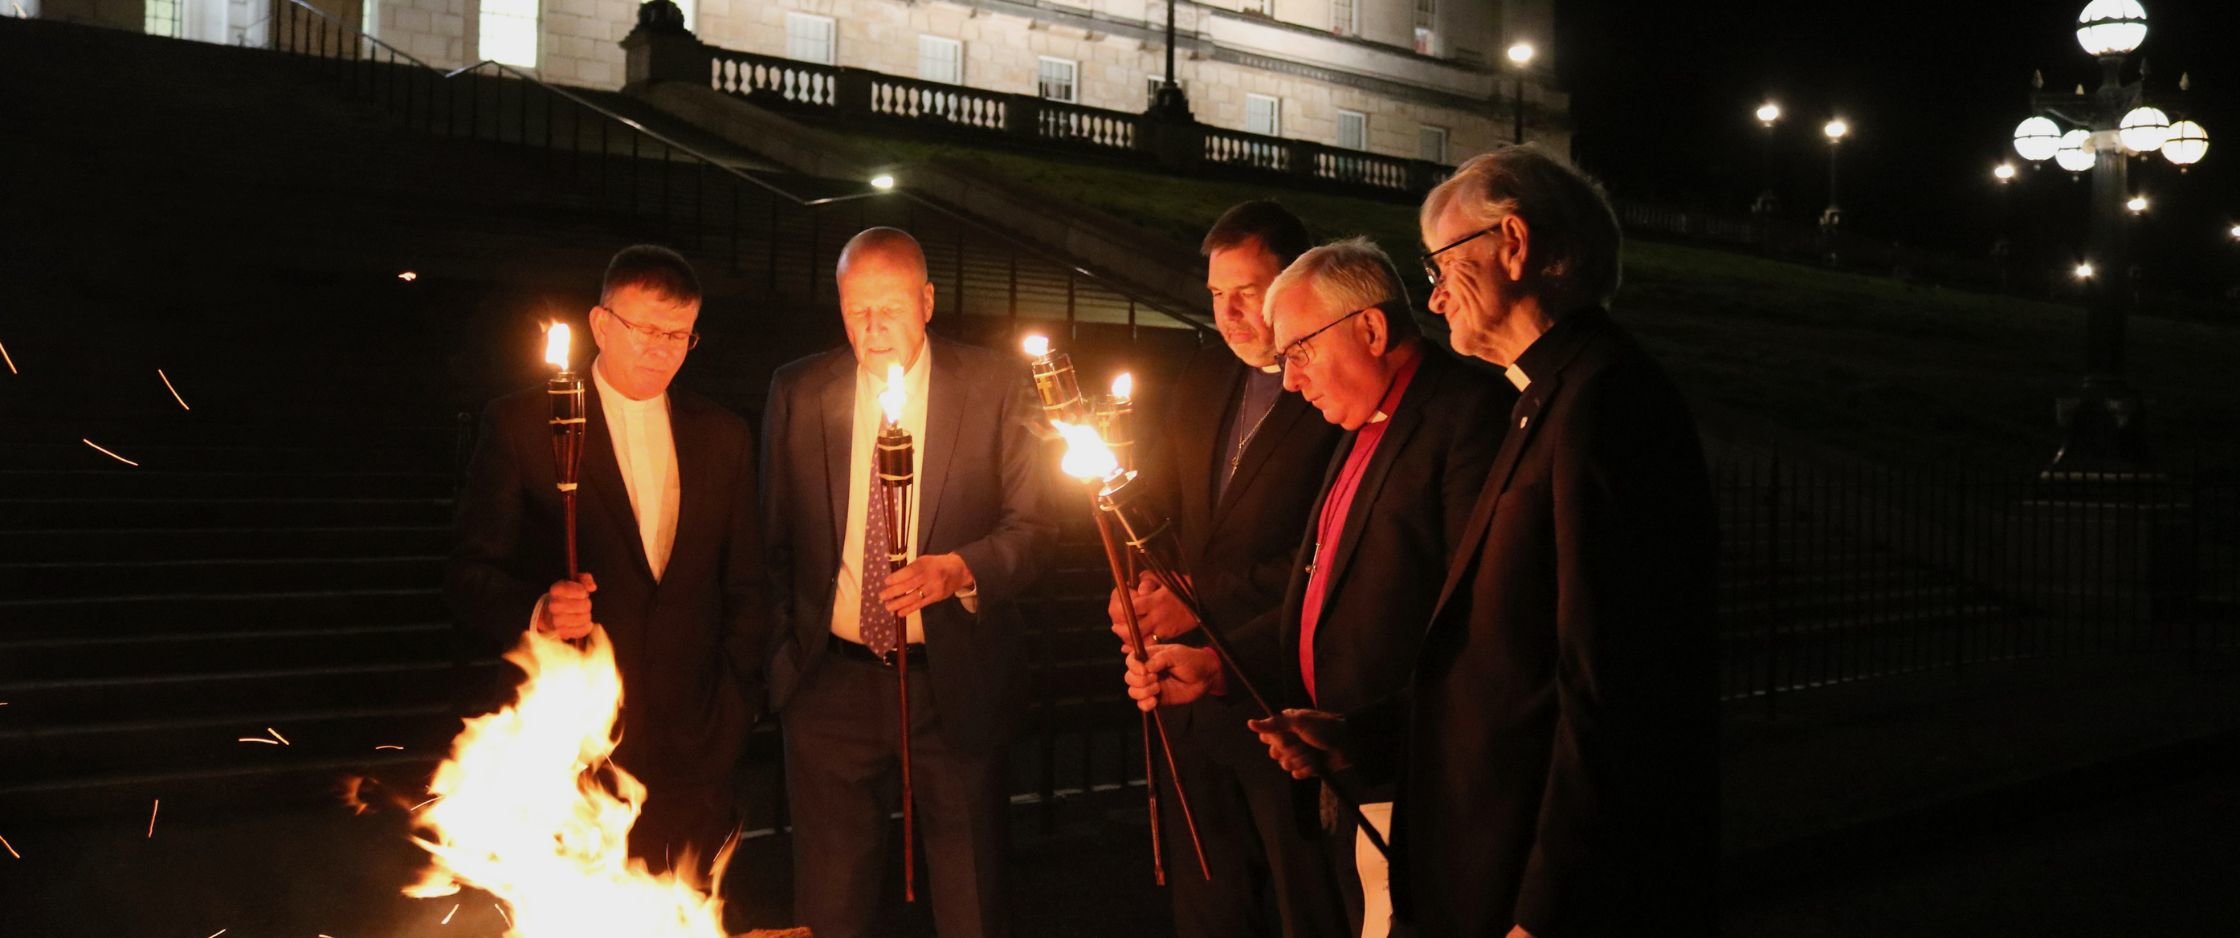 Prayers for the Assembly as beacon is lit at Stormont